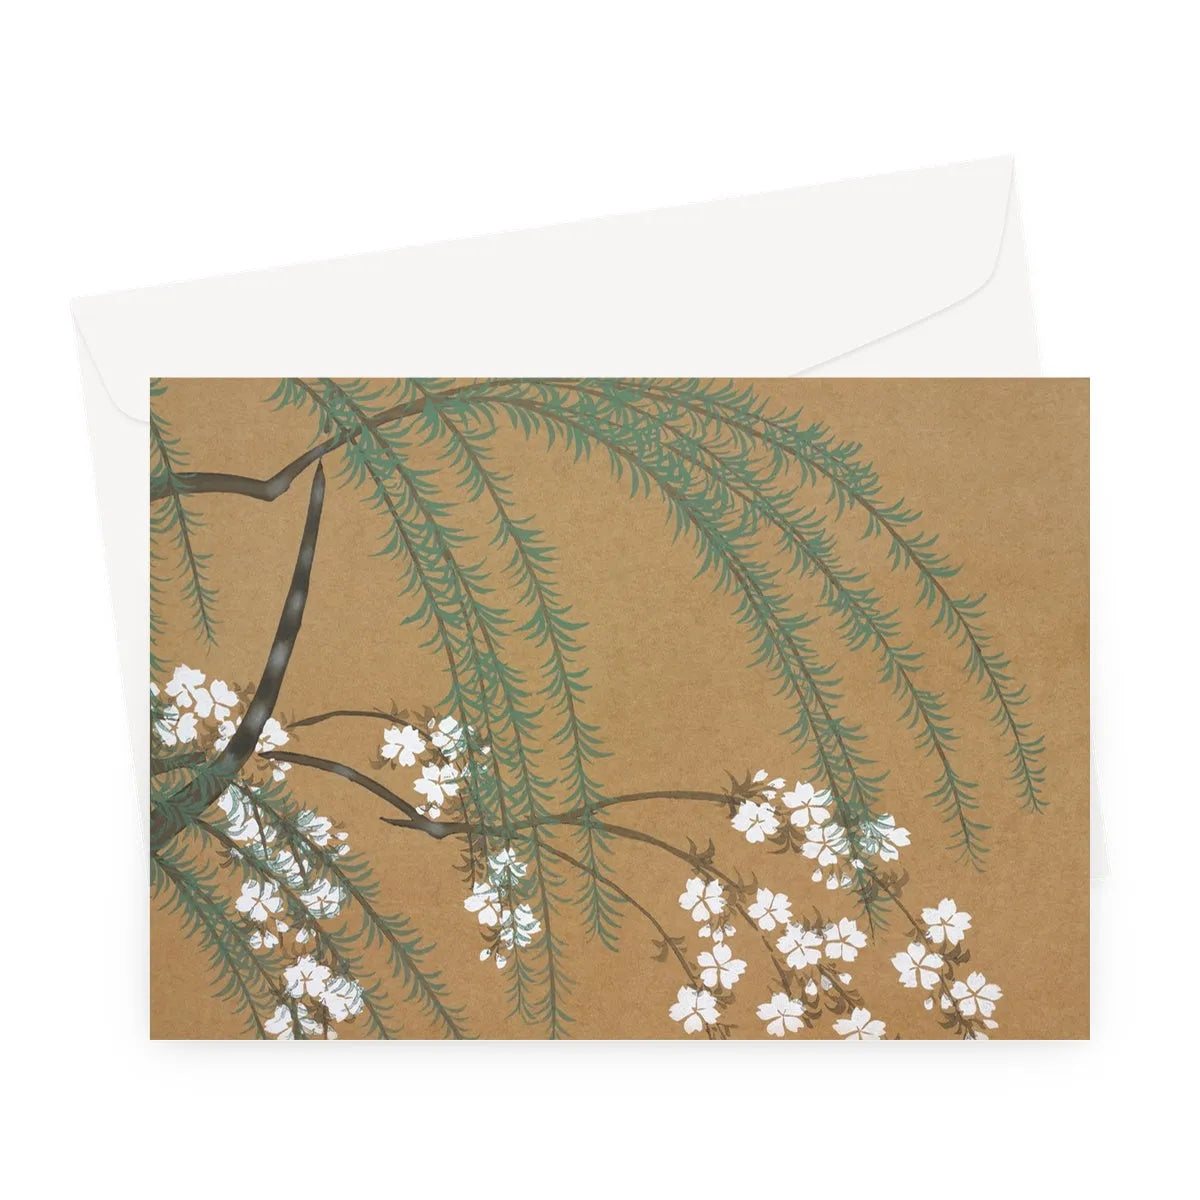 Blossoms From Momoyogusa By Kamisaka Sekka Greeting Card - A5 Landscape / 1 Card - Notebooks & Notepads - Aesthetic Art